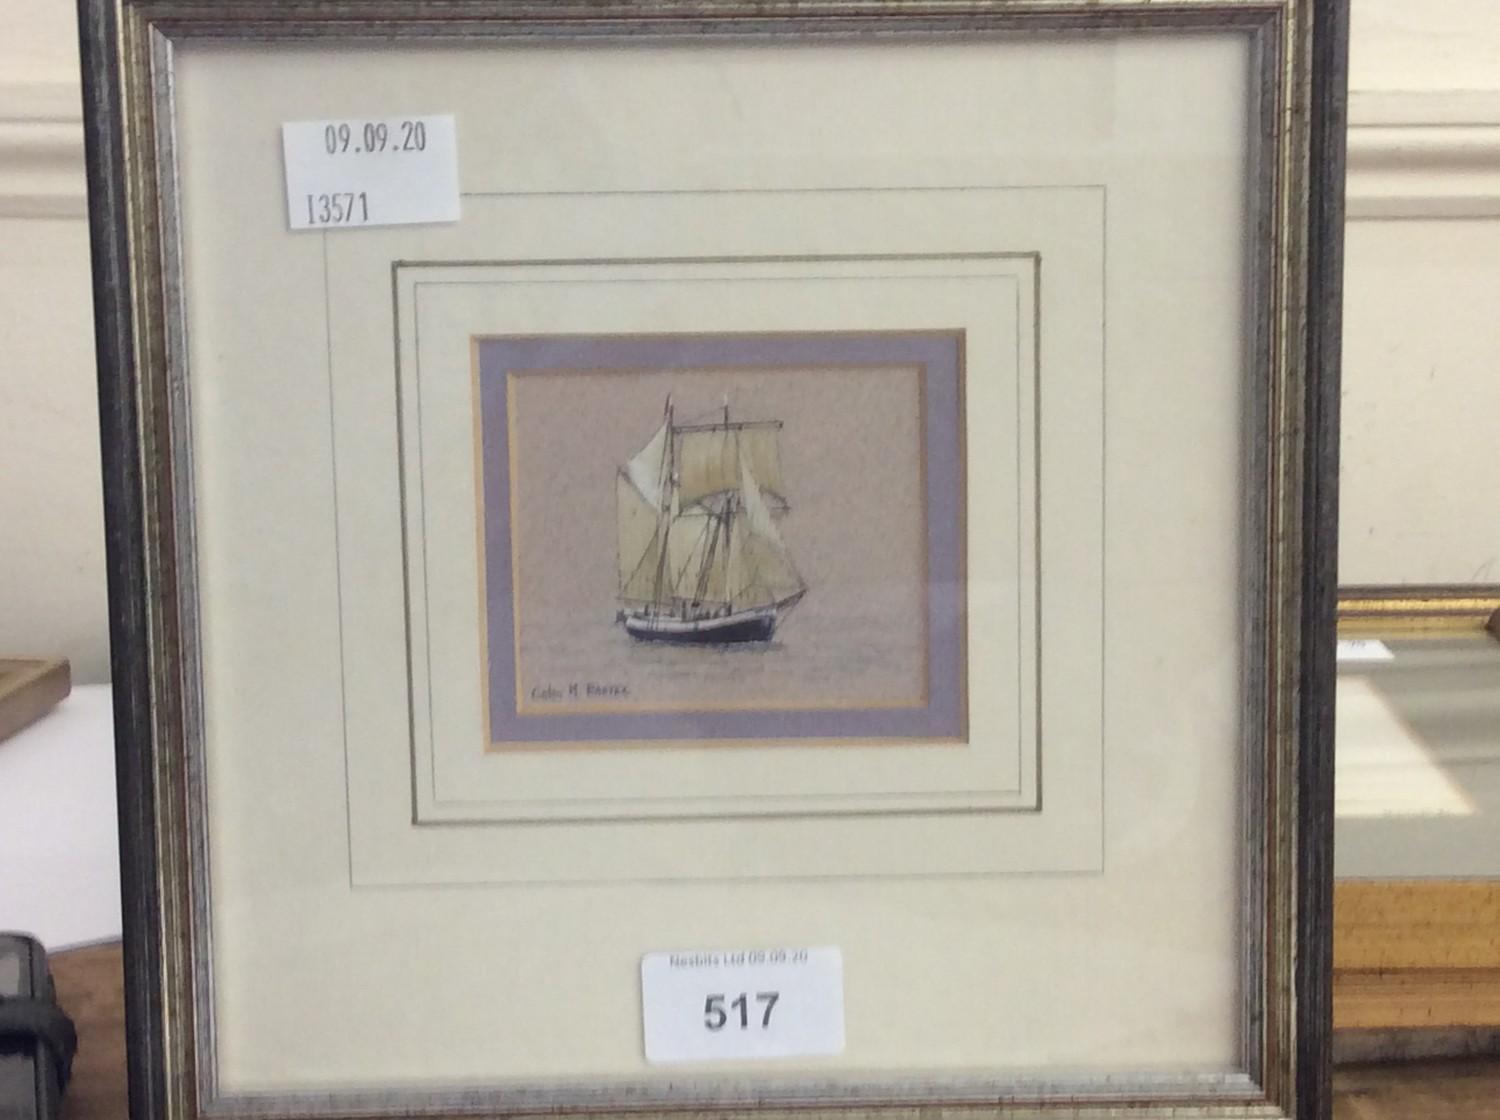 Colin M. Baxter - "The Schooner Helea" a small study, signed, w/c, 6x8cm, together with four